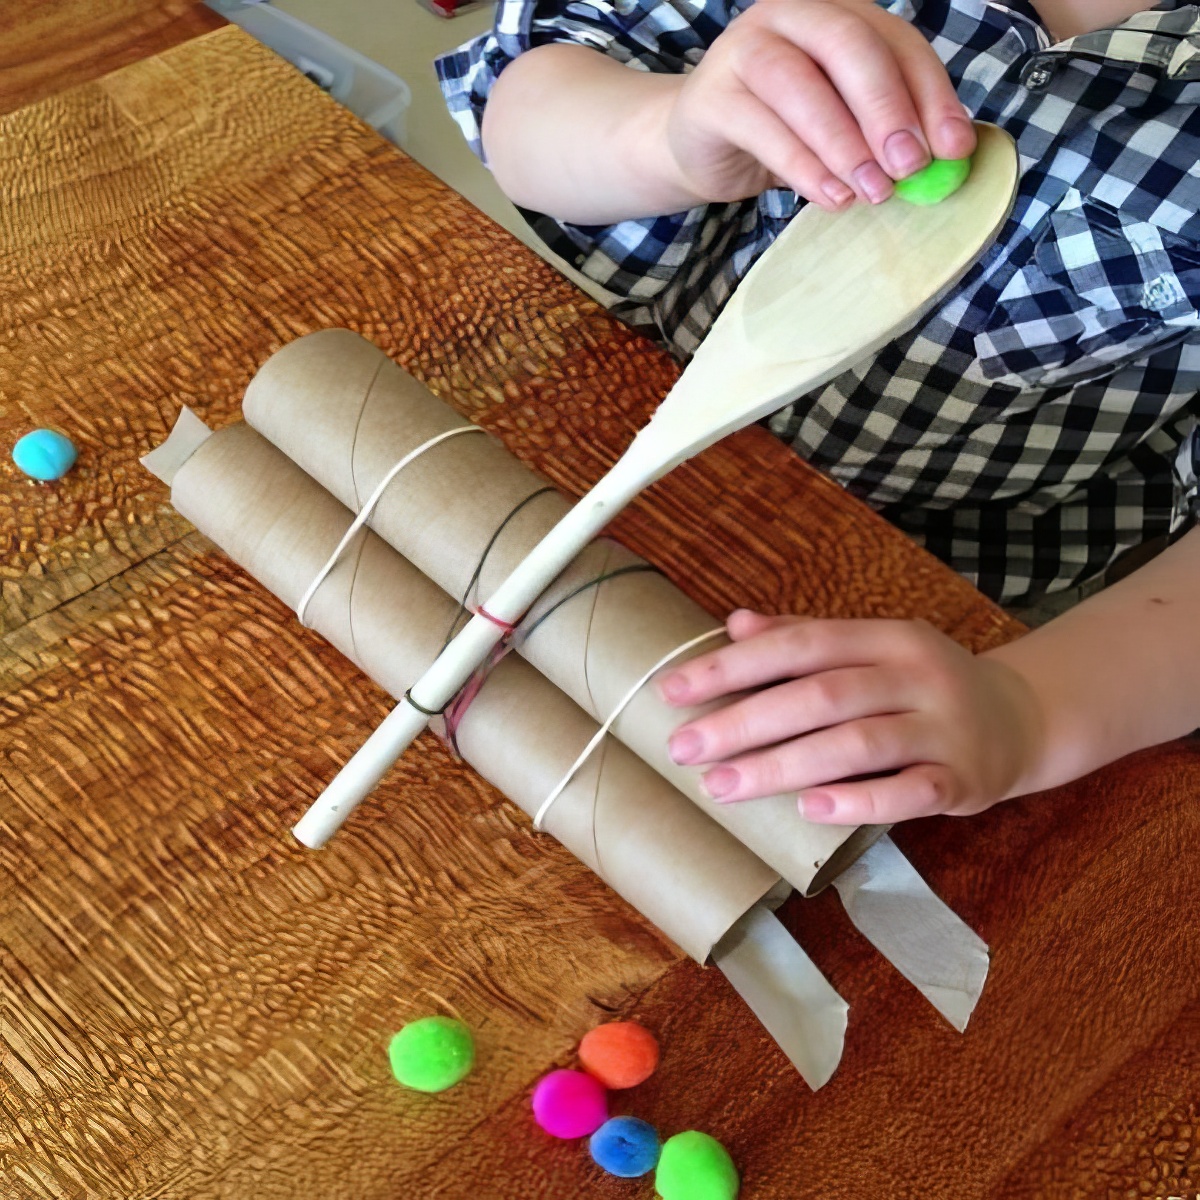 simple-diy-catapult, everyday things catapult craft, creative catapult 